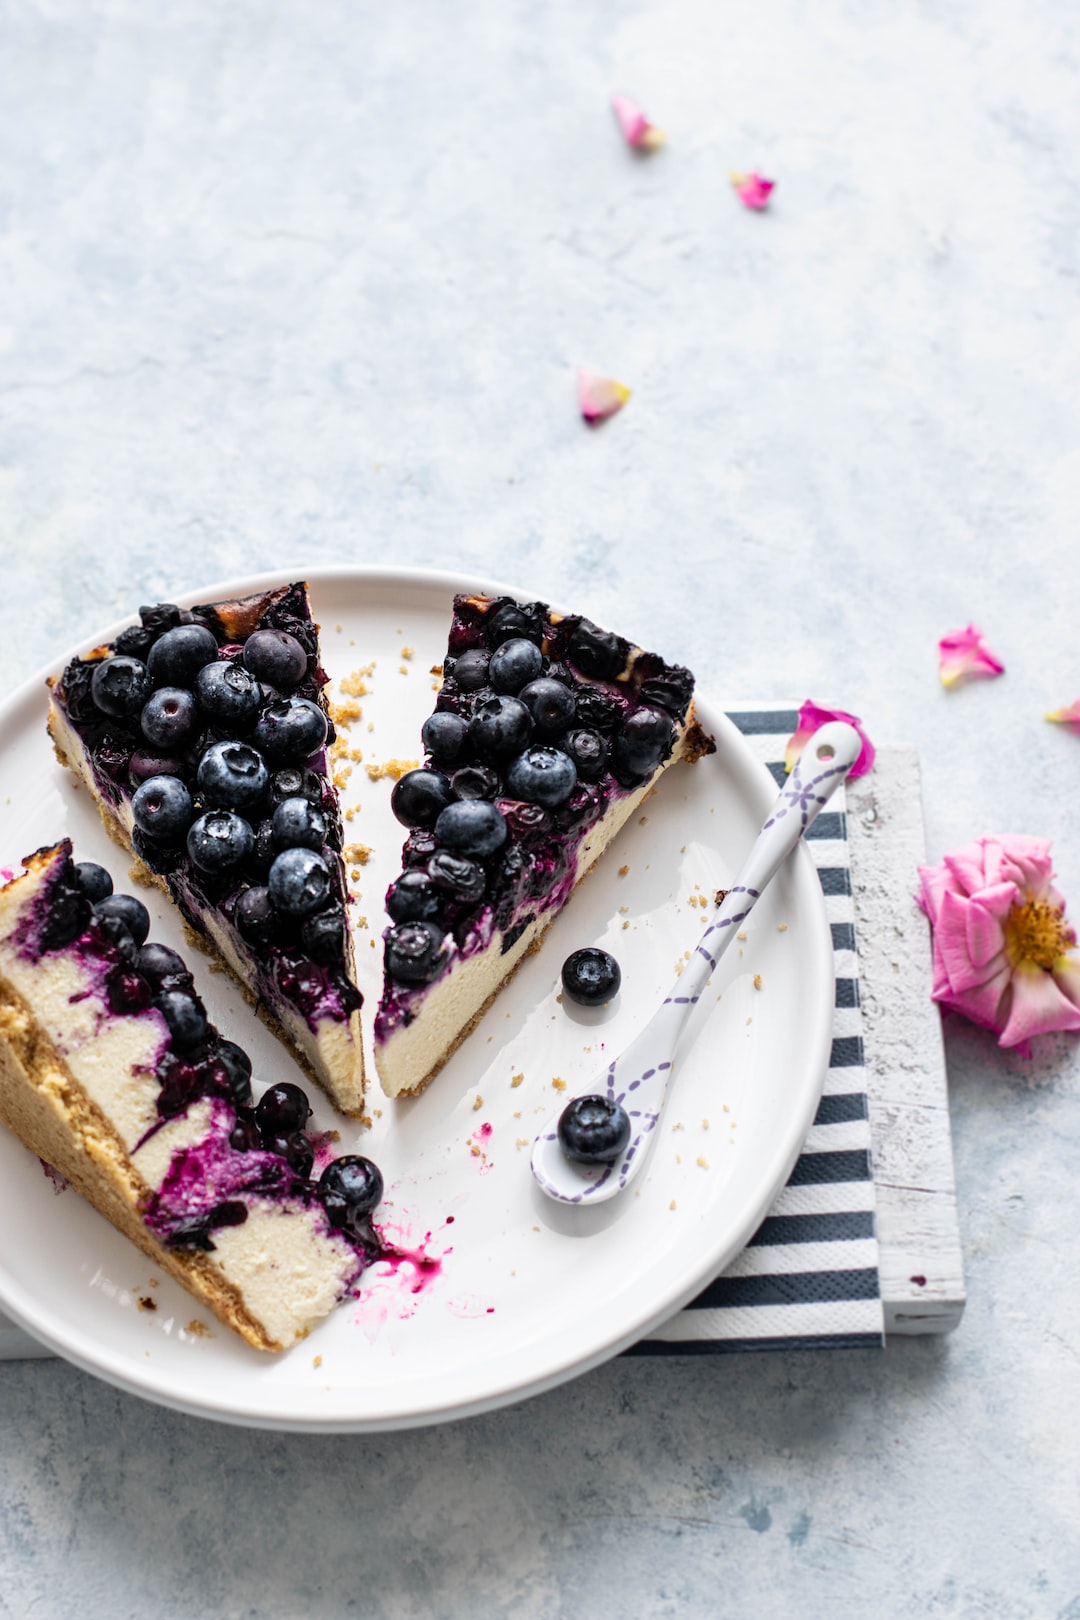 Let's celebrate the end of summer with a piece of delicious blueberry cheesecake :)